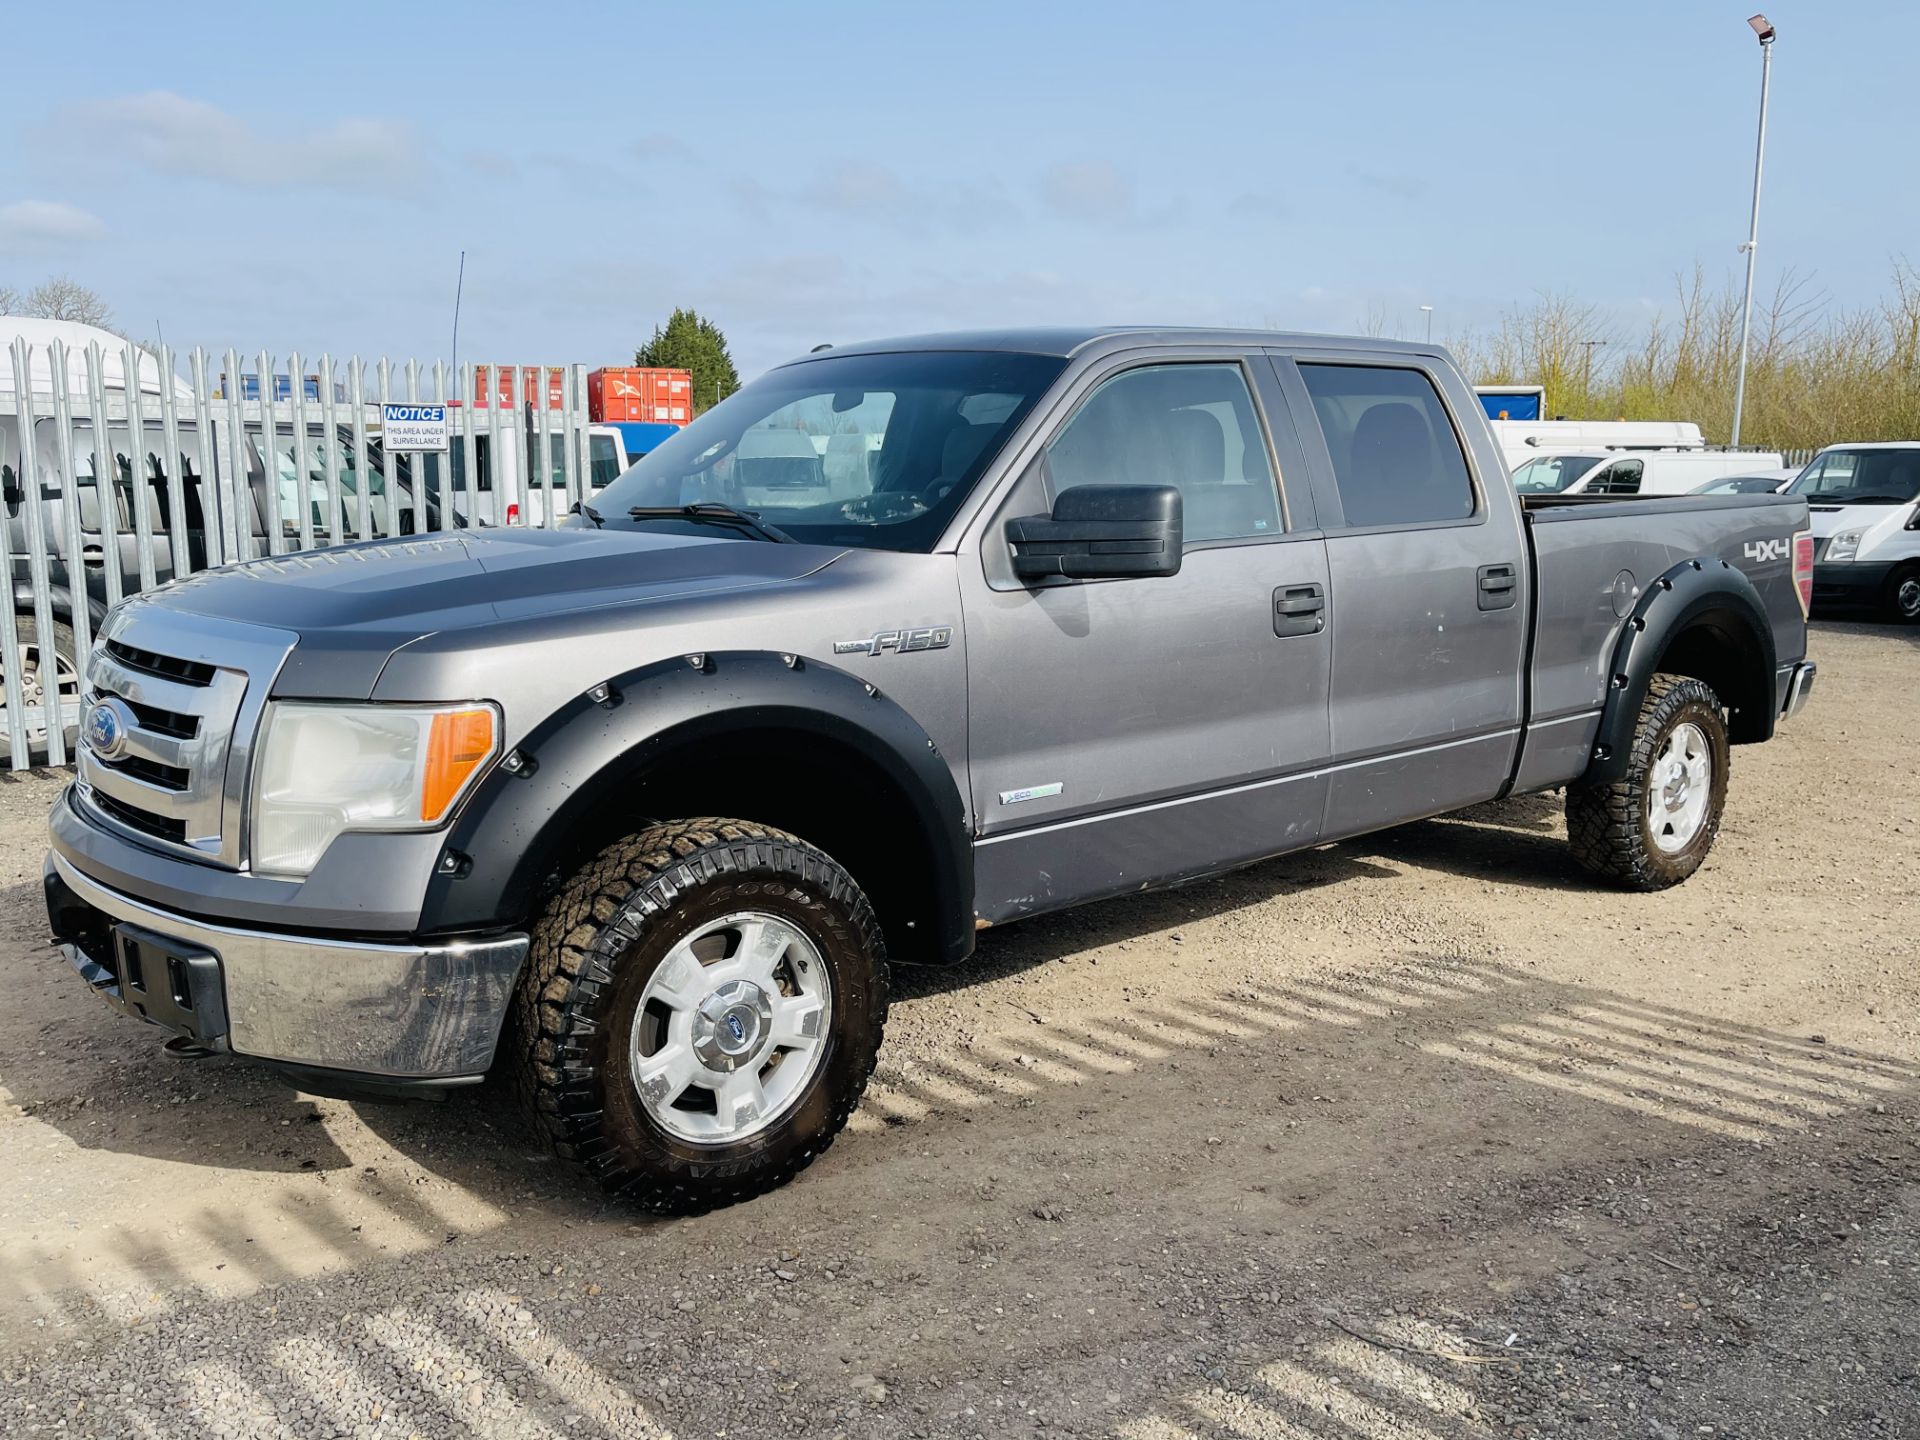 ** ON SALE **Ford F-150 XLT Edition 3.5L V6 Eco-boost Super-Crew 4x4 - '2012 Year' - Air Con - - Image 6 of 28